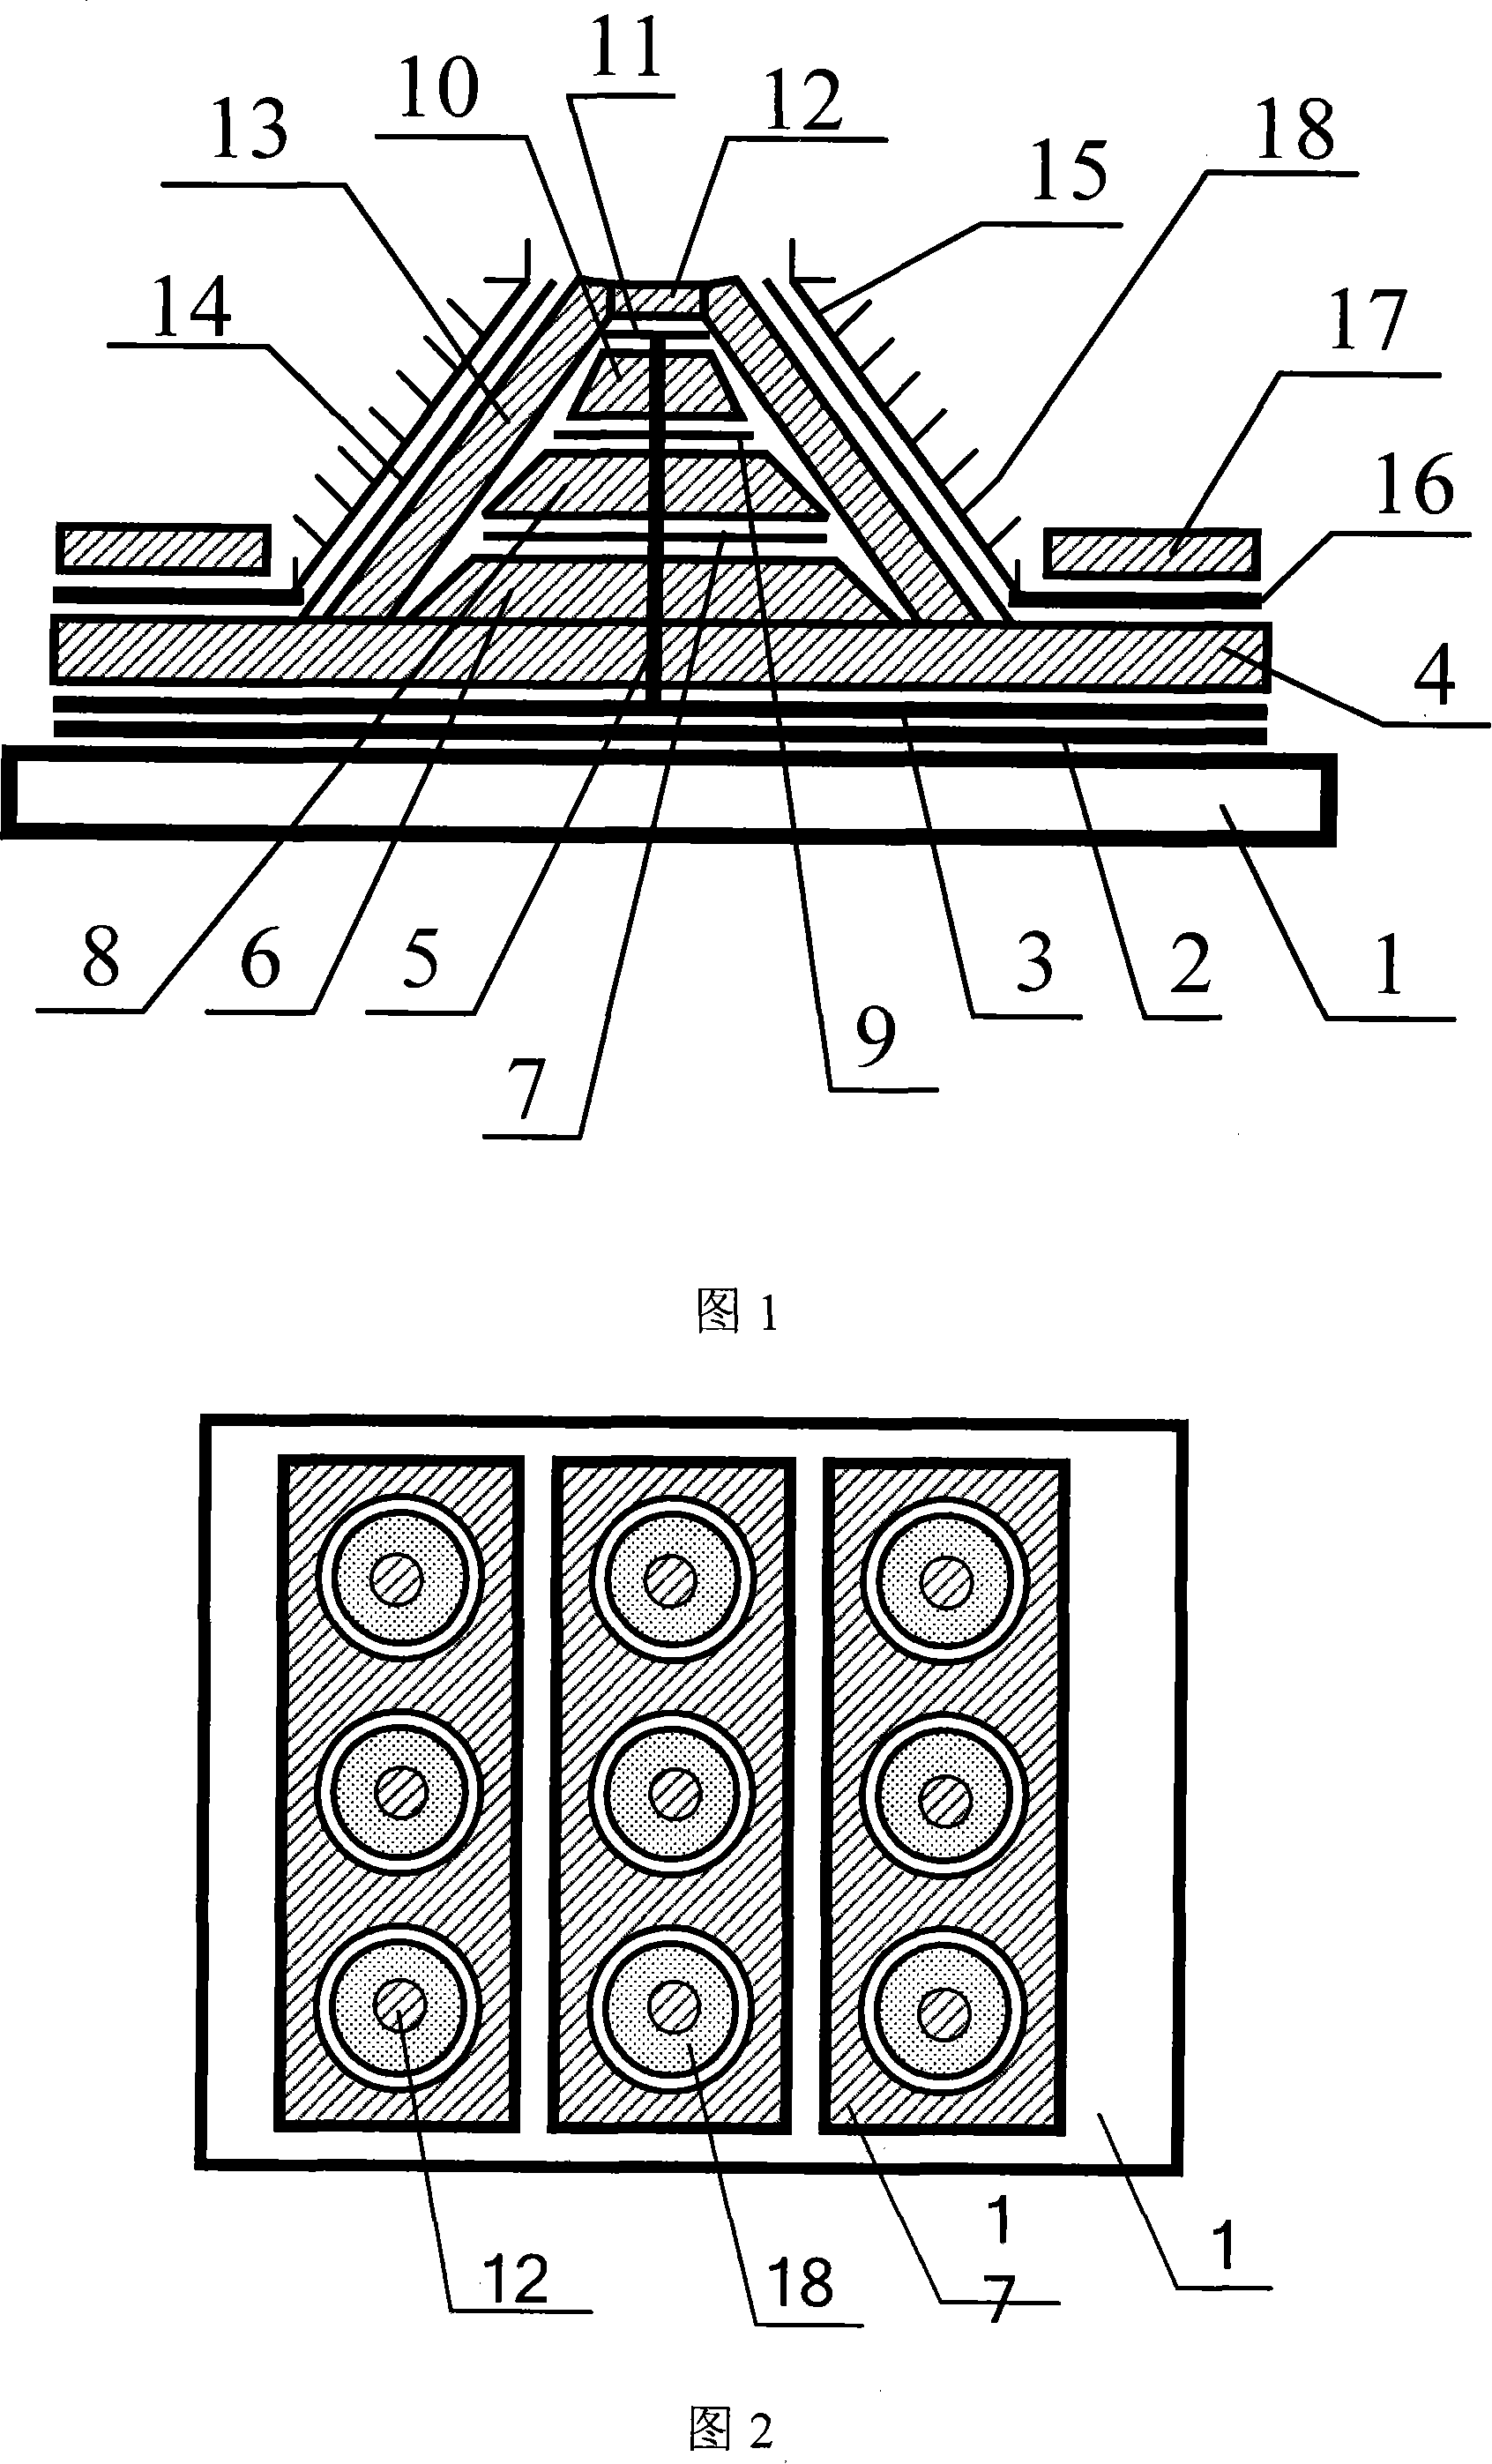 Multiple coaxial cylindrical surface side grid control type flat panel display and its manufacturing technique